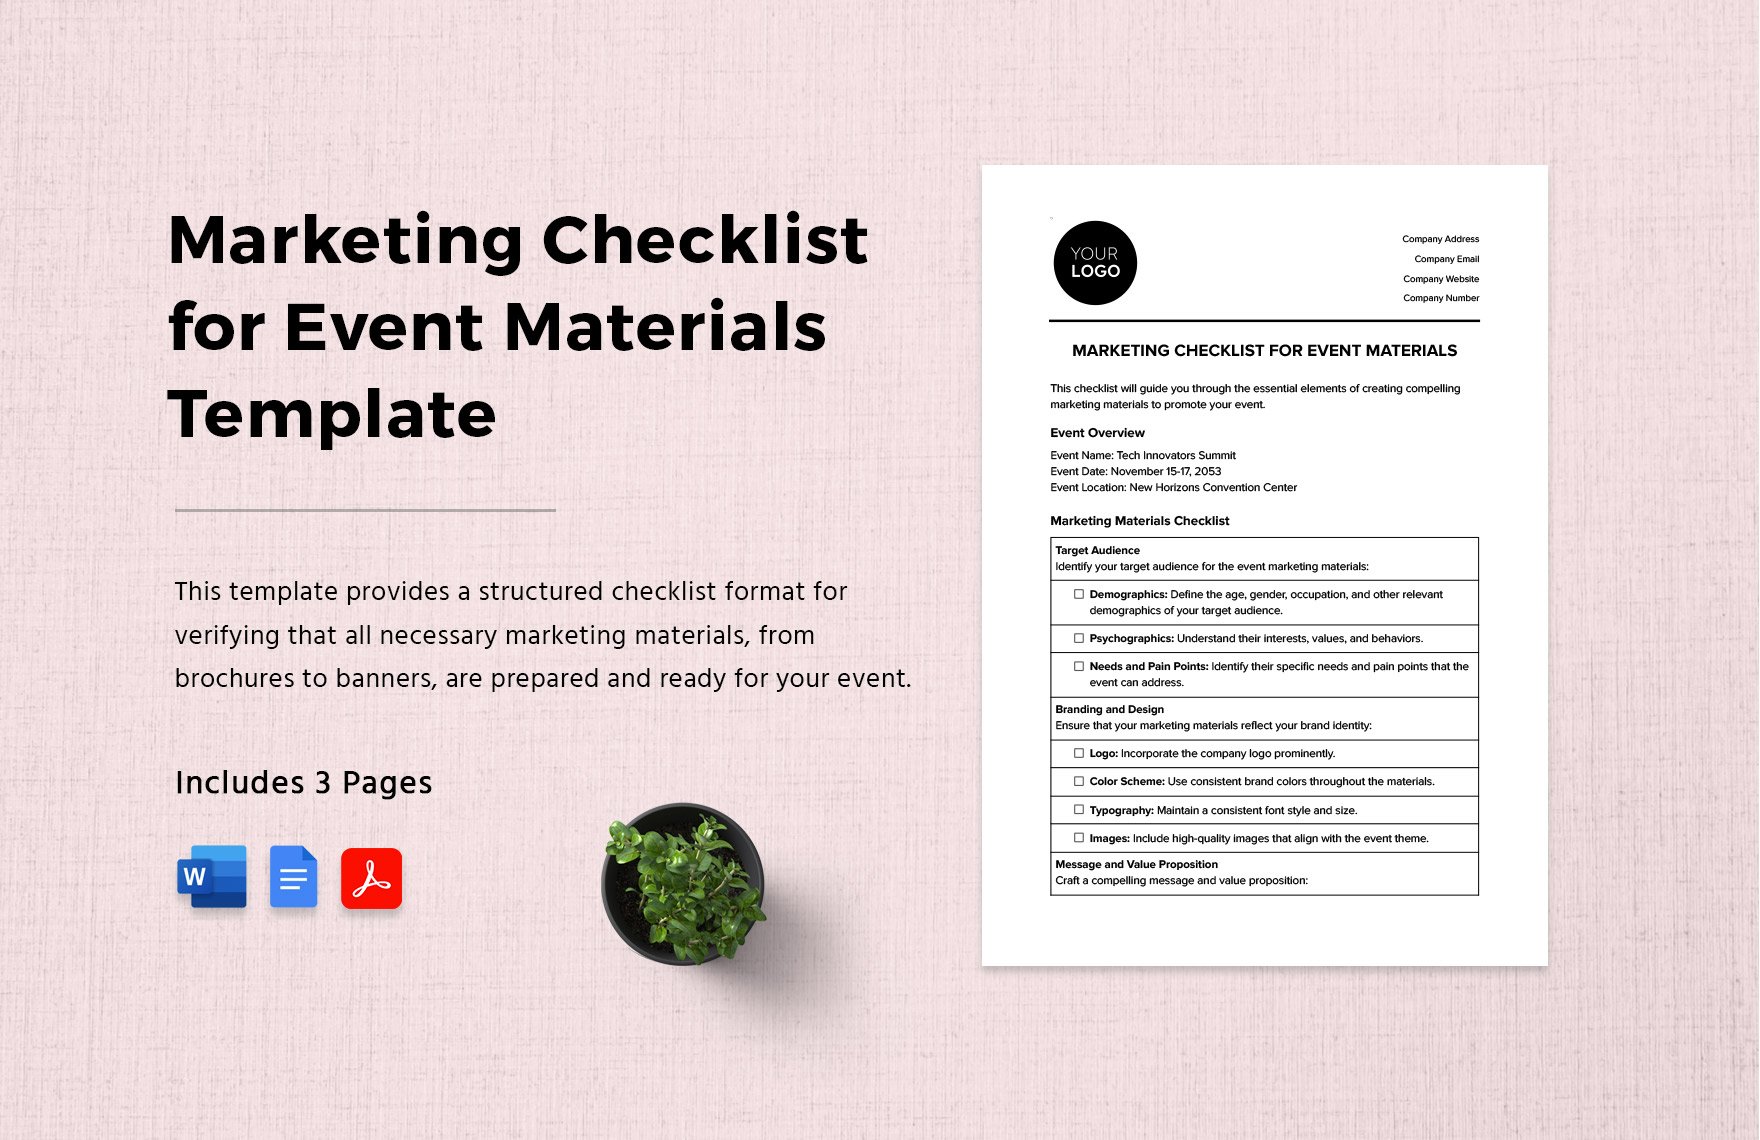 Marketing Checklist for Event Materials Template in Word, Google Docs, PDF